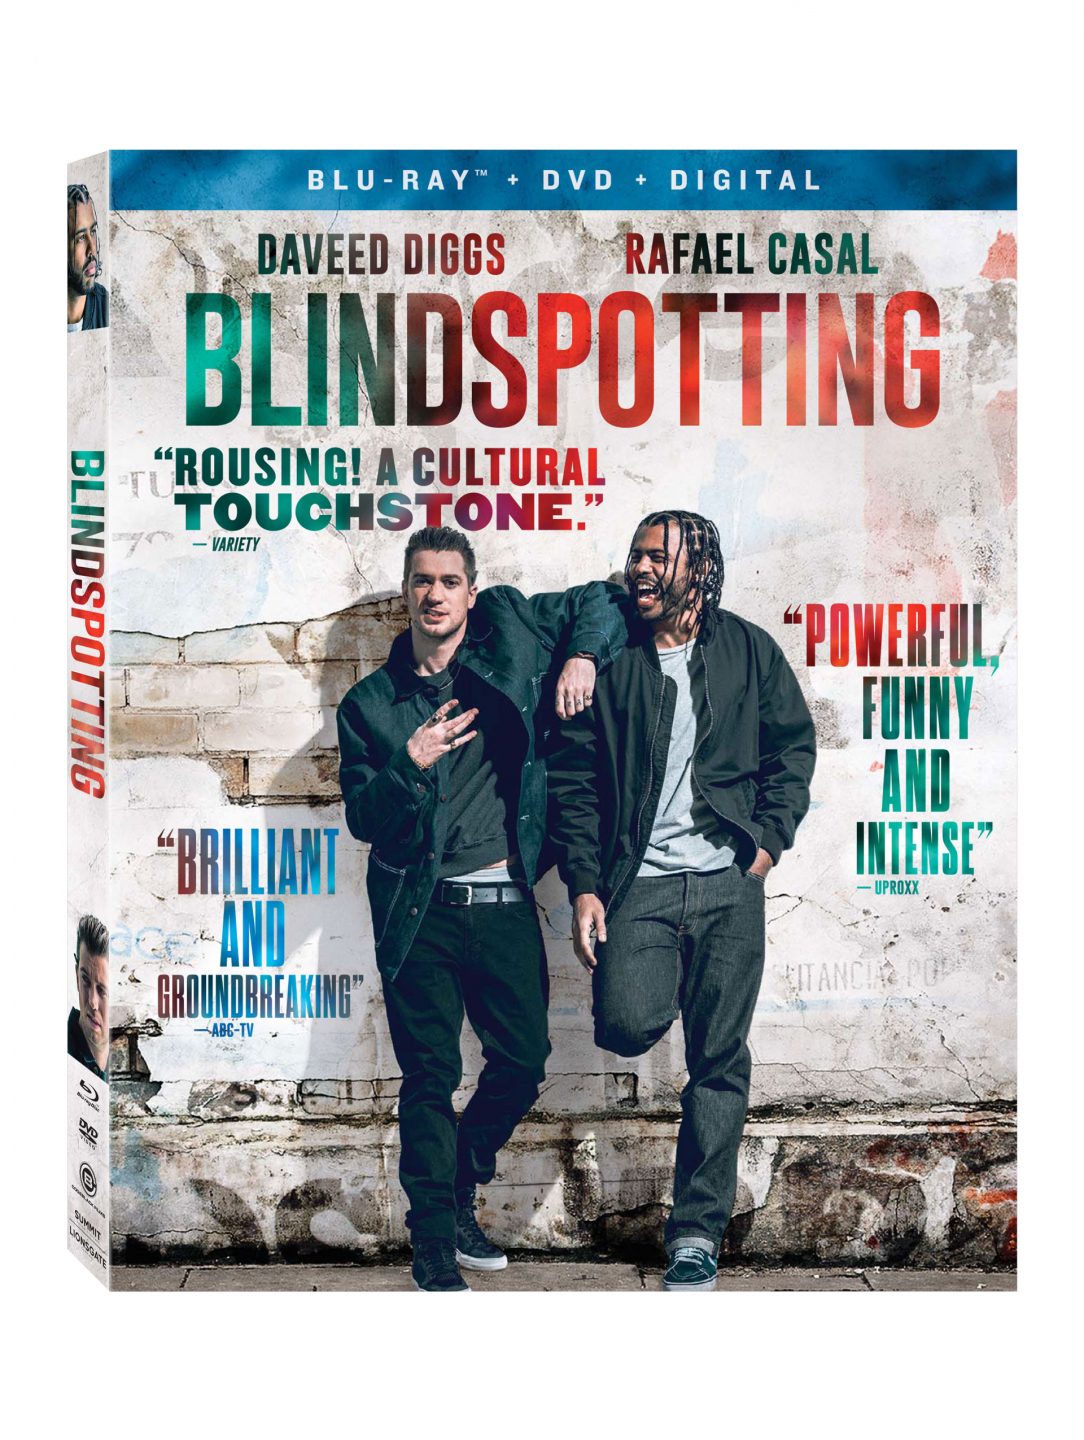 Blindspotting Blu-Ray Combo Pack cover (Lionsgate Home Entertainment)